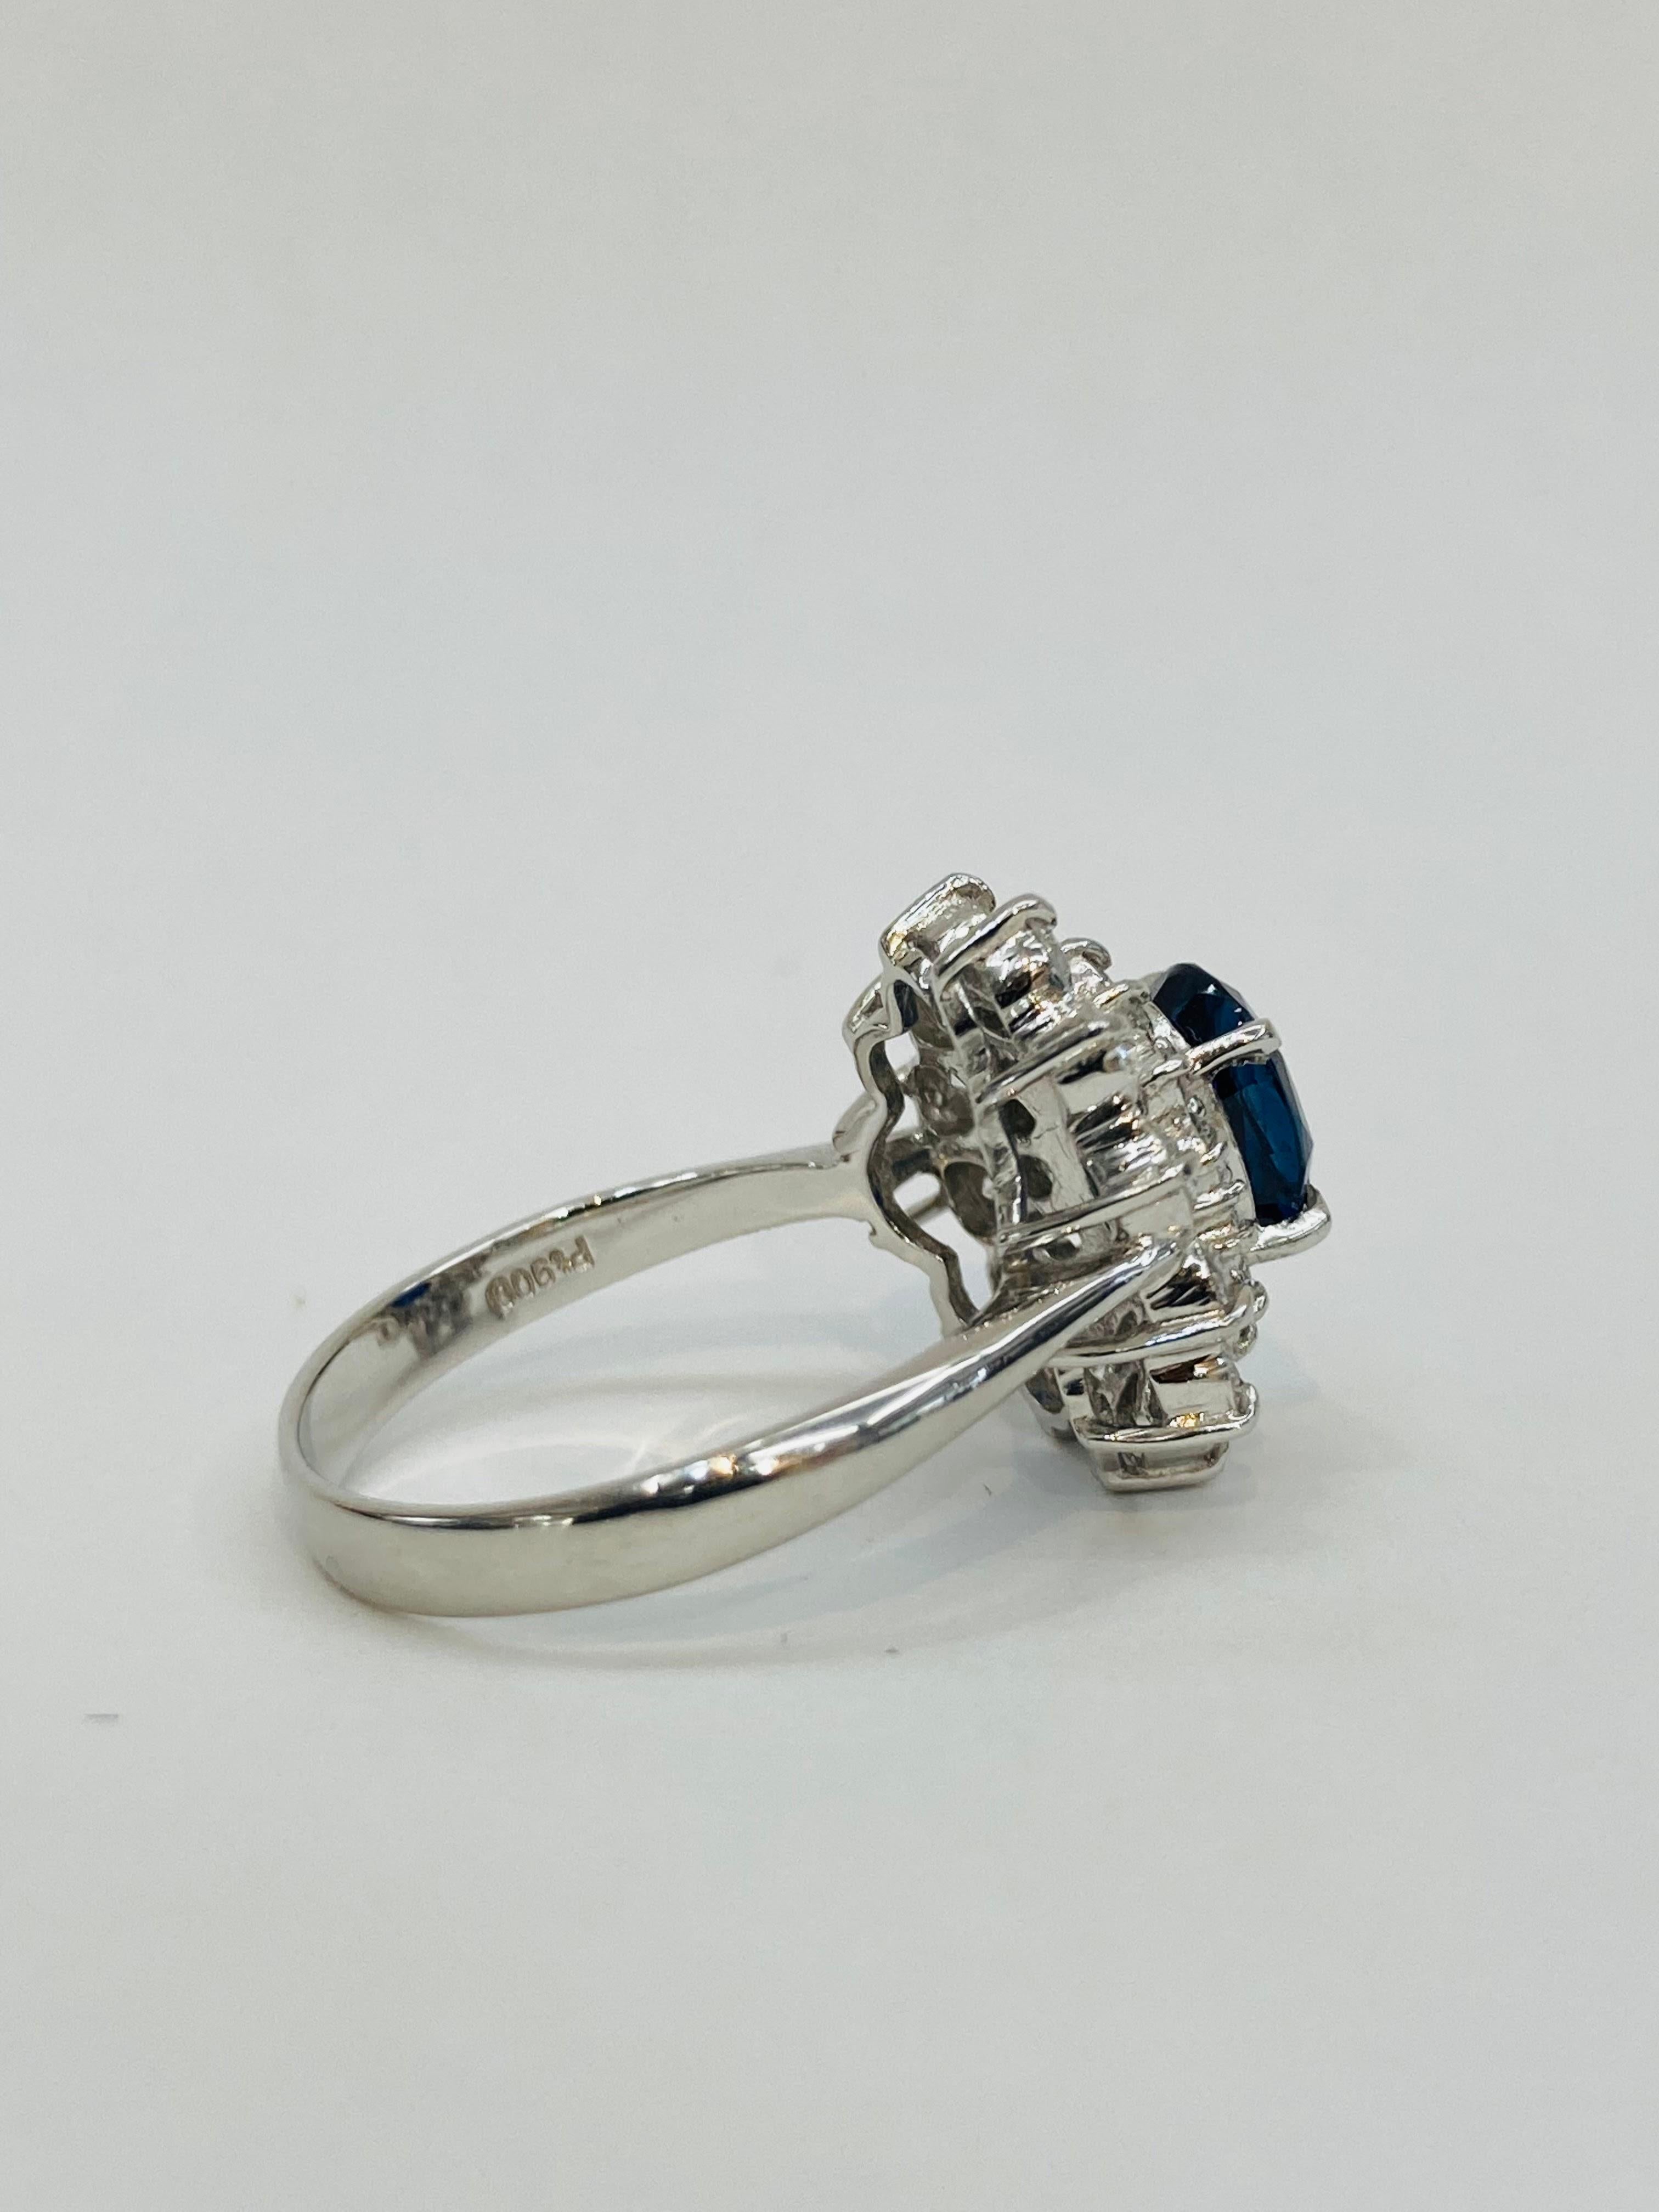 Bochic “Retro Vintage” Natural Blue Sapphire Platinum Diamond Cluster Ring

Natural Blue Sapphire 1.60  Carat 
Diamonds 1.01 Carat 
F color 
VS clarity 
Platinum 900
6.10 Gram

This Ring is from the 